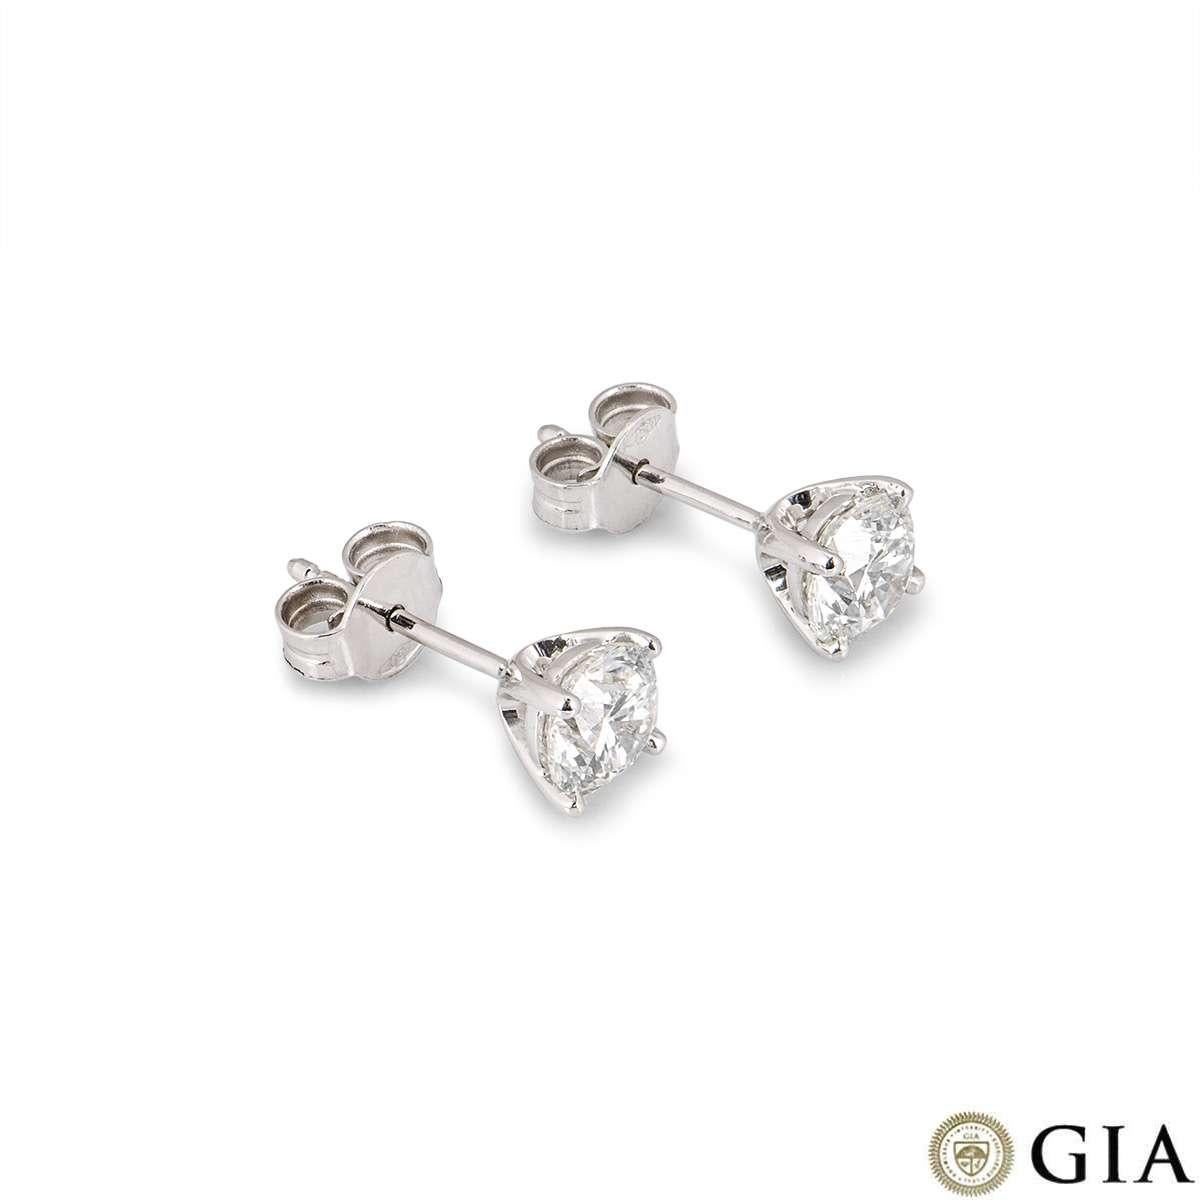 A pair of 18k white gold diamond stud earrings. The earrings feature round brilliant cut diamonds in a 4 claw setting. Both diamonds weigh 0.80ct each, one is G colour VS1 clarity and the other is H colour VS2 clarity. The earrings have post and